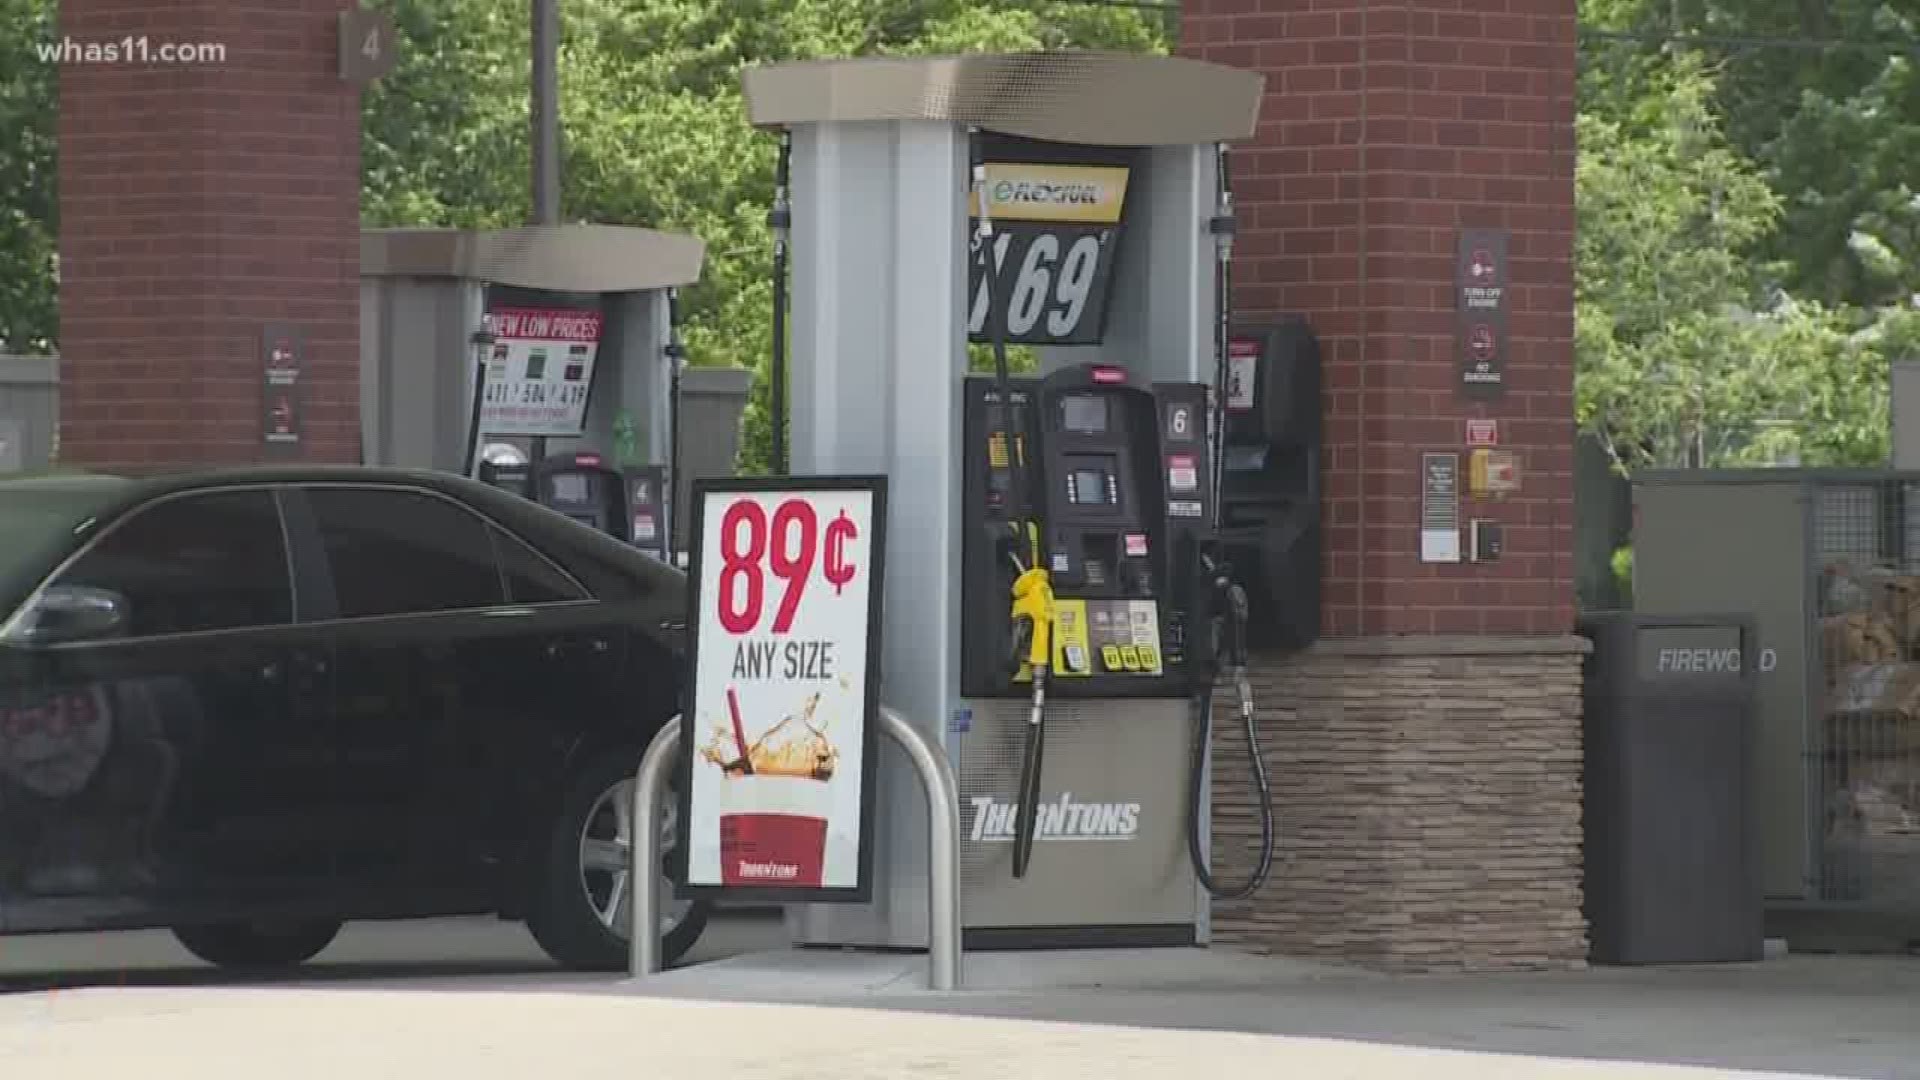 The Kentucky governor is looking to give Kentuckians in Louisville and other counties relief at the pump.